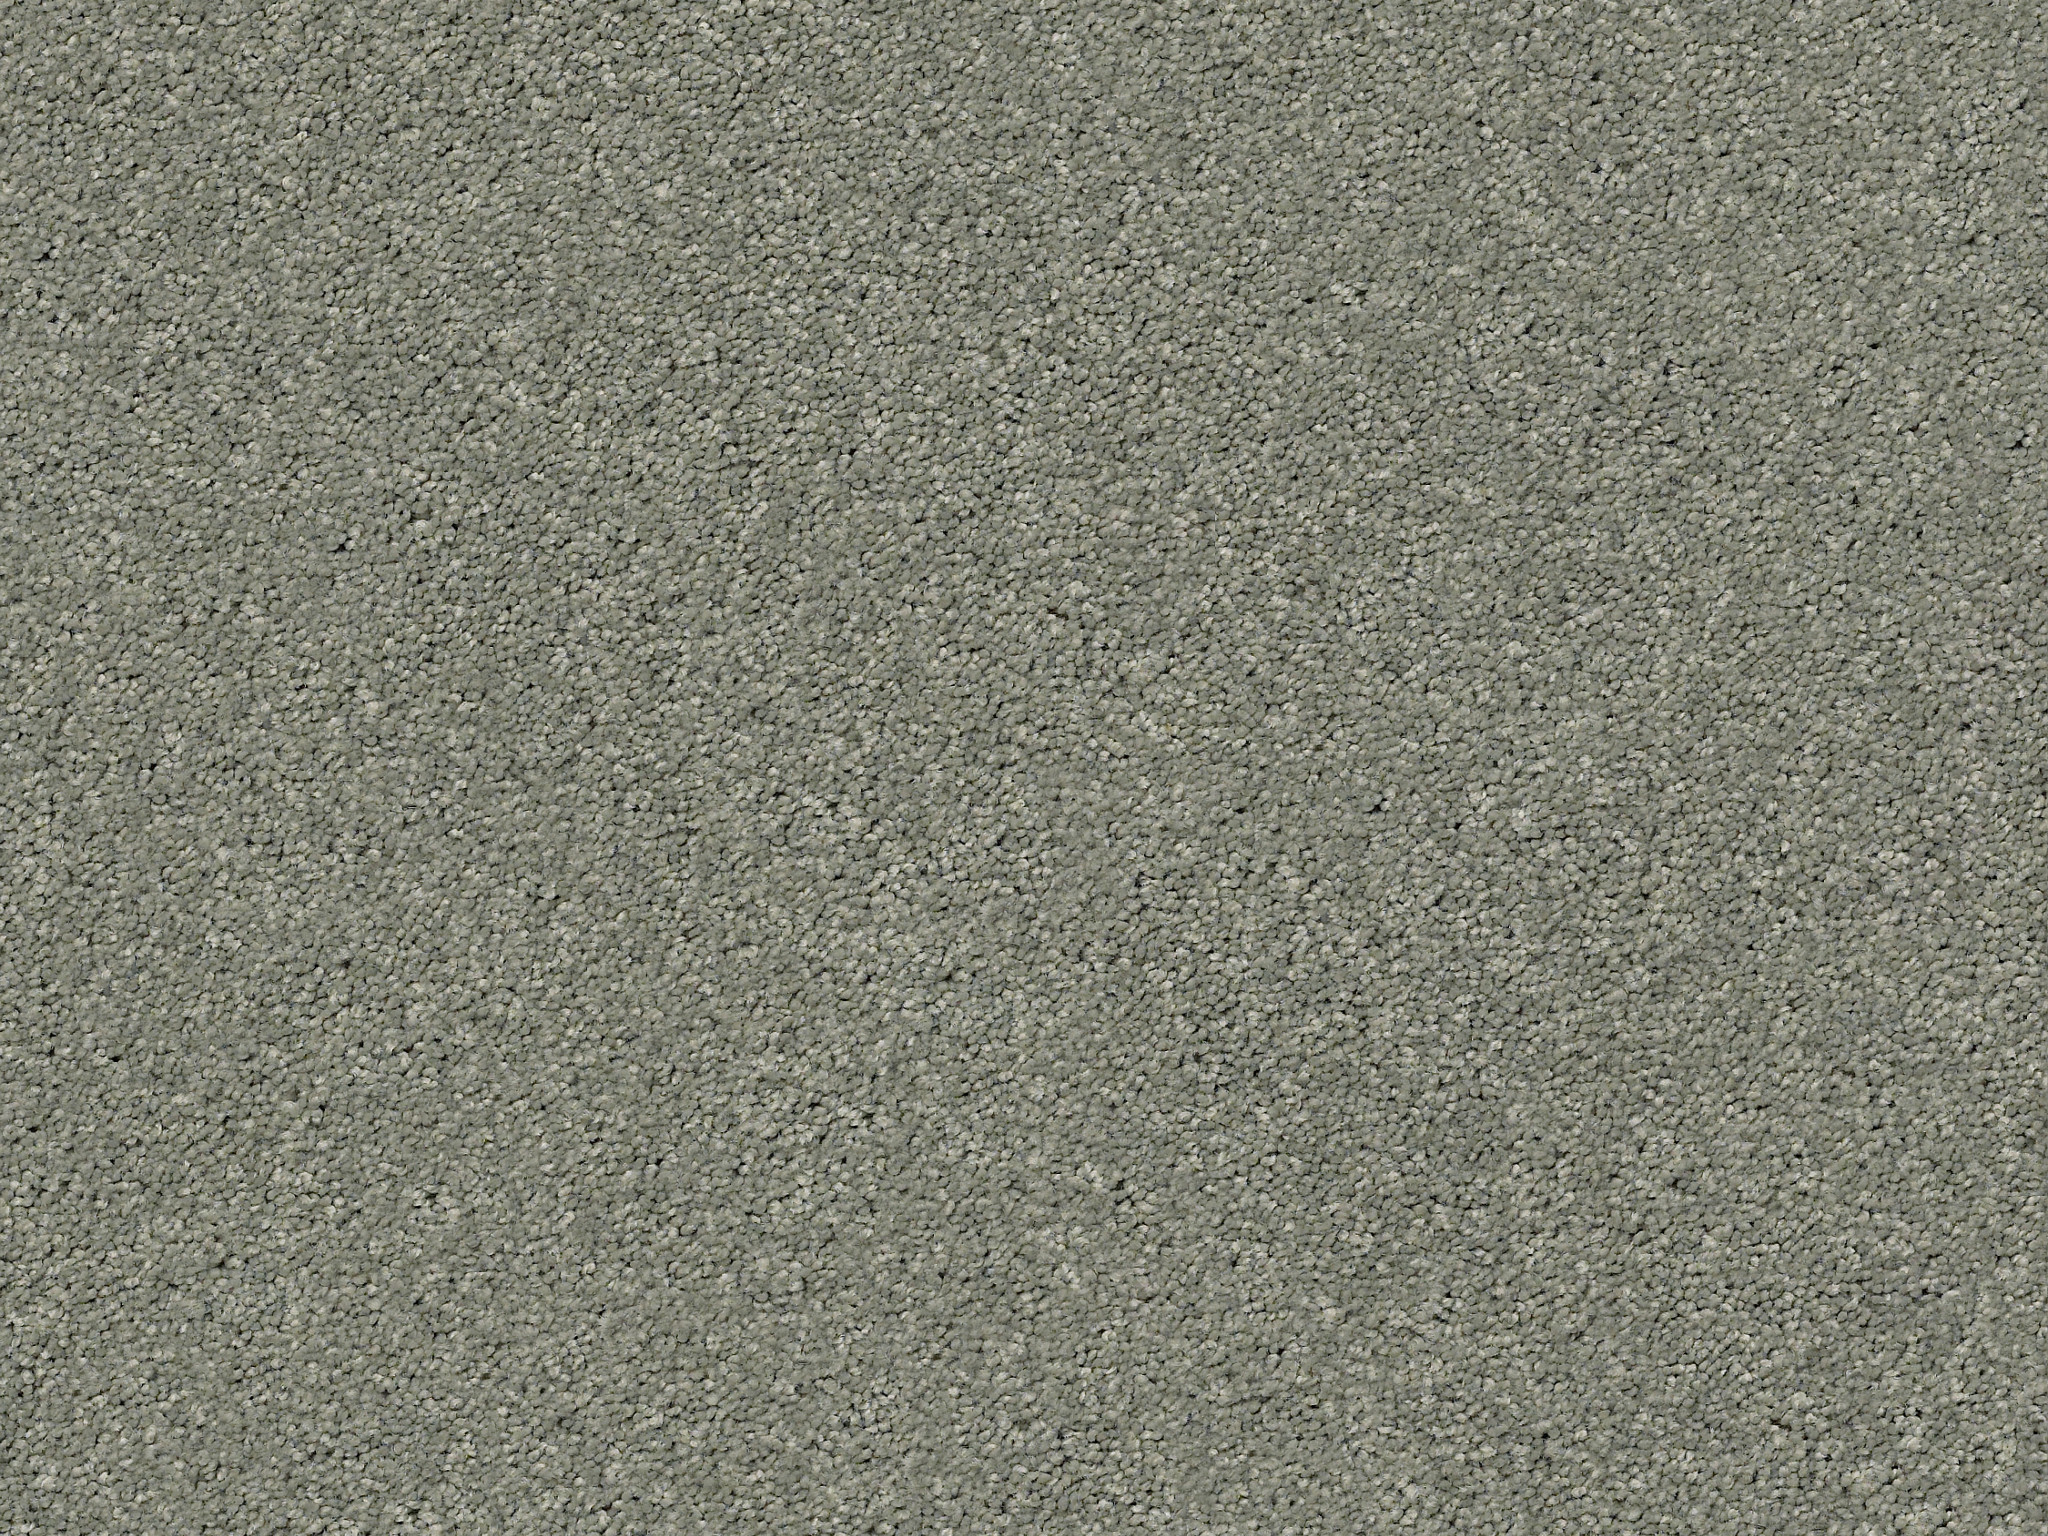 First Act Carpet - Pine Forest Zoomed Swatch Thumbnail